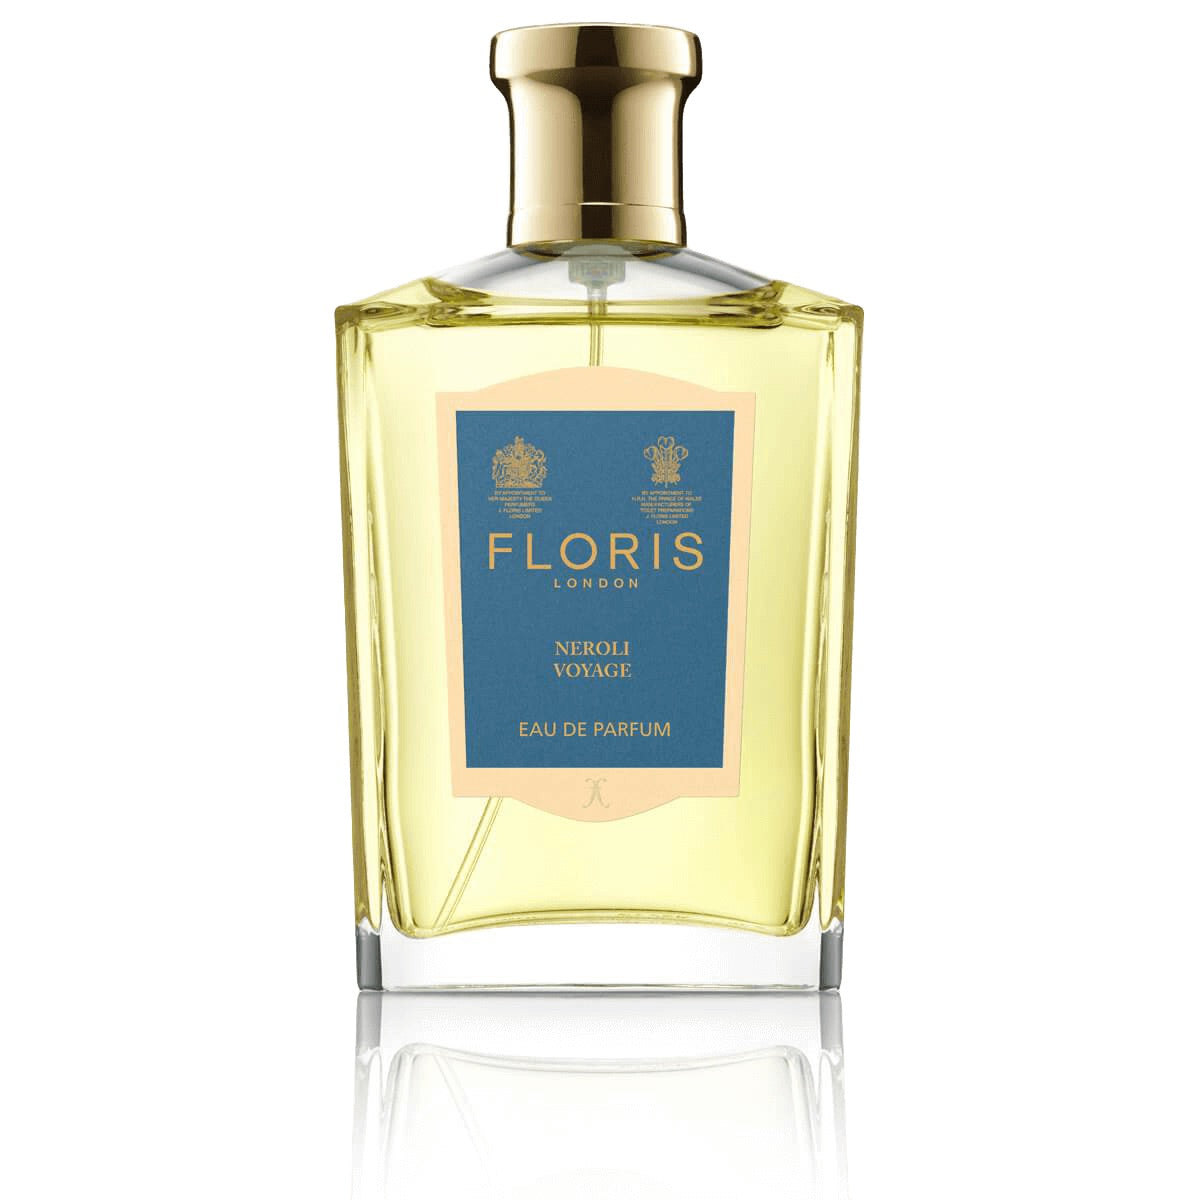 A bottle of FLORIS Neroli Voyage EDP 100 ML cologne with a citrus marine fragrance, on a white background, available at KirbyAllison.com.